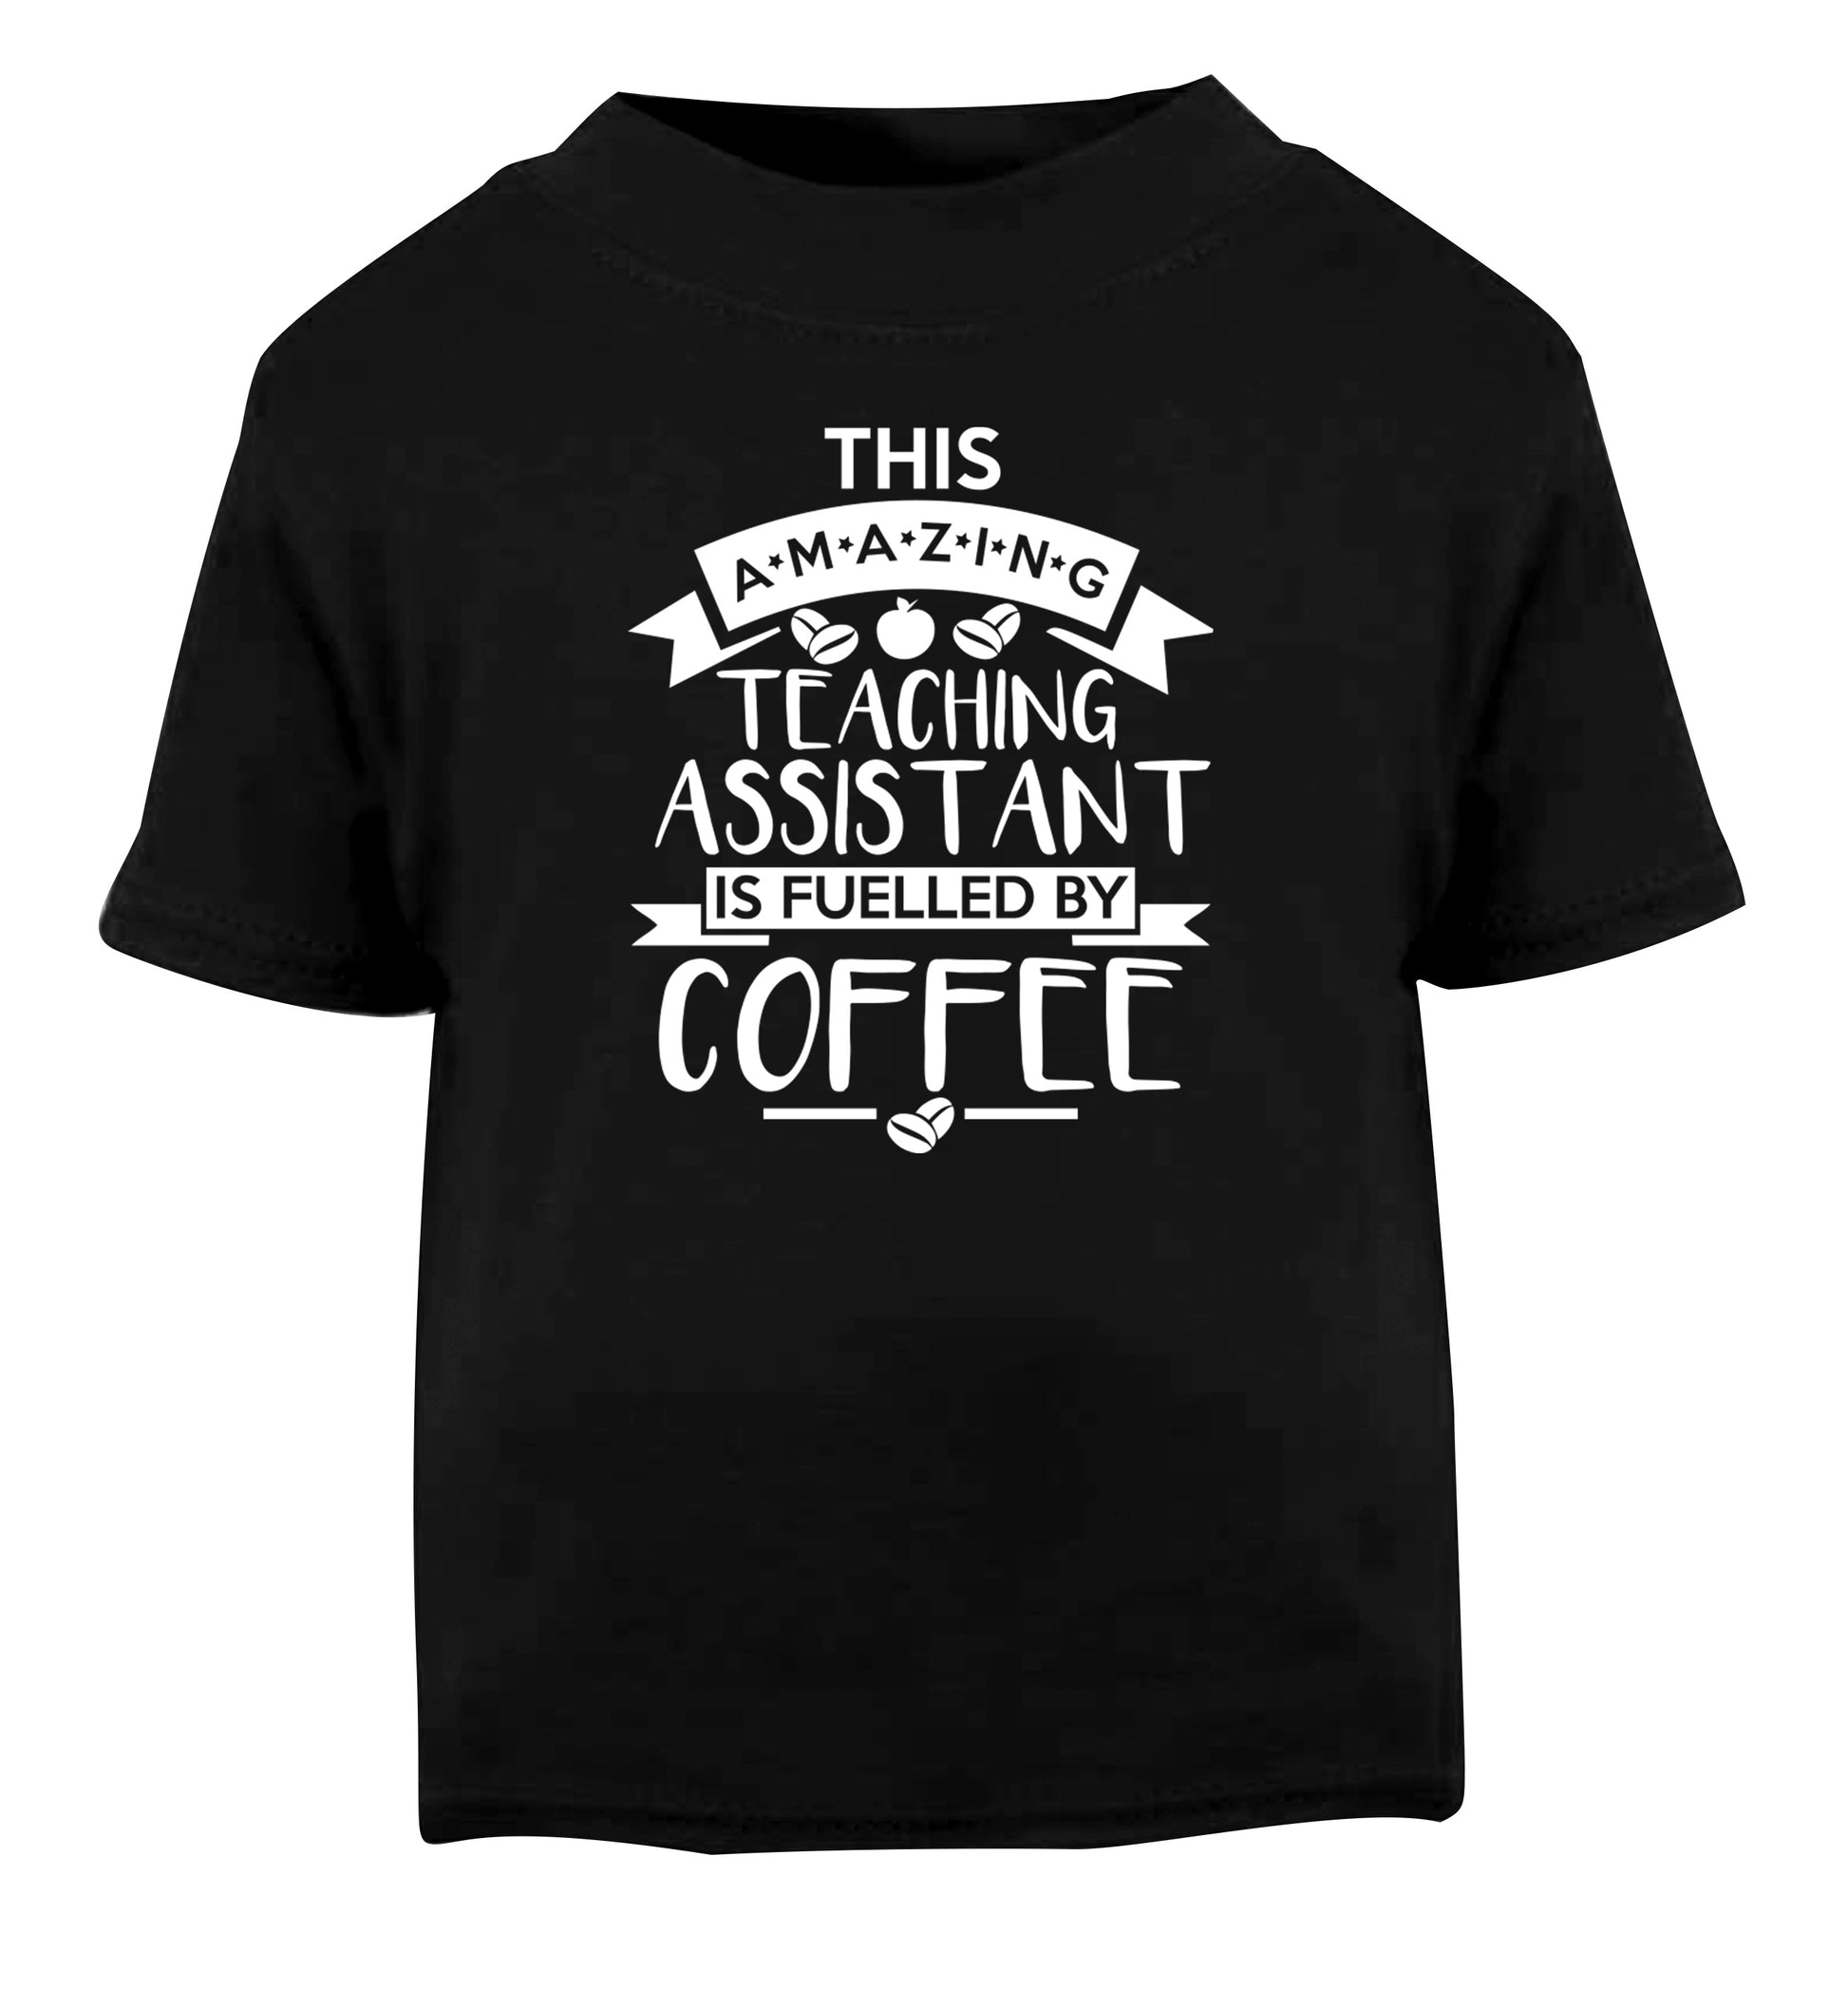 This amazing teaching assistant is fuelled by coffee Black Baby Toddler Tshirt 2 years